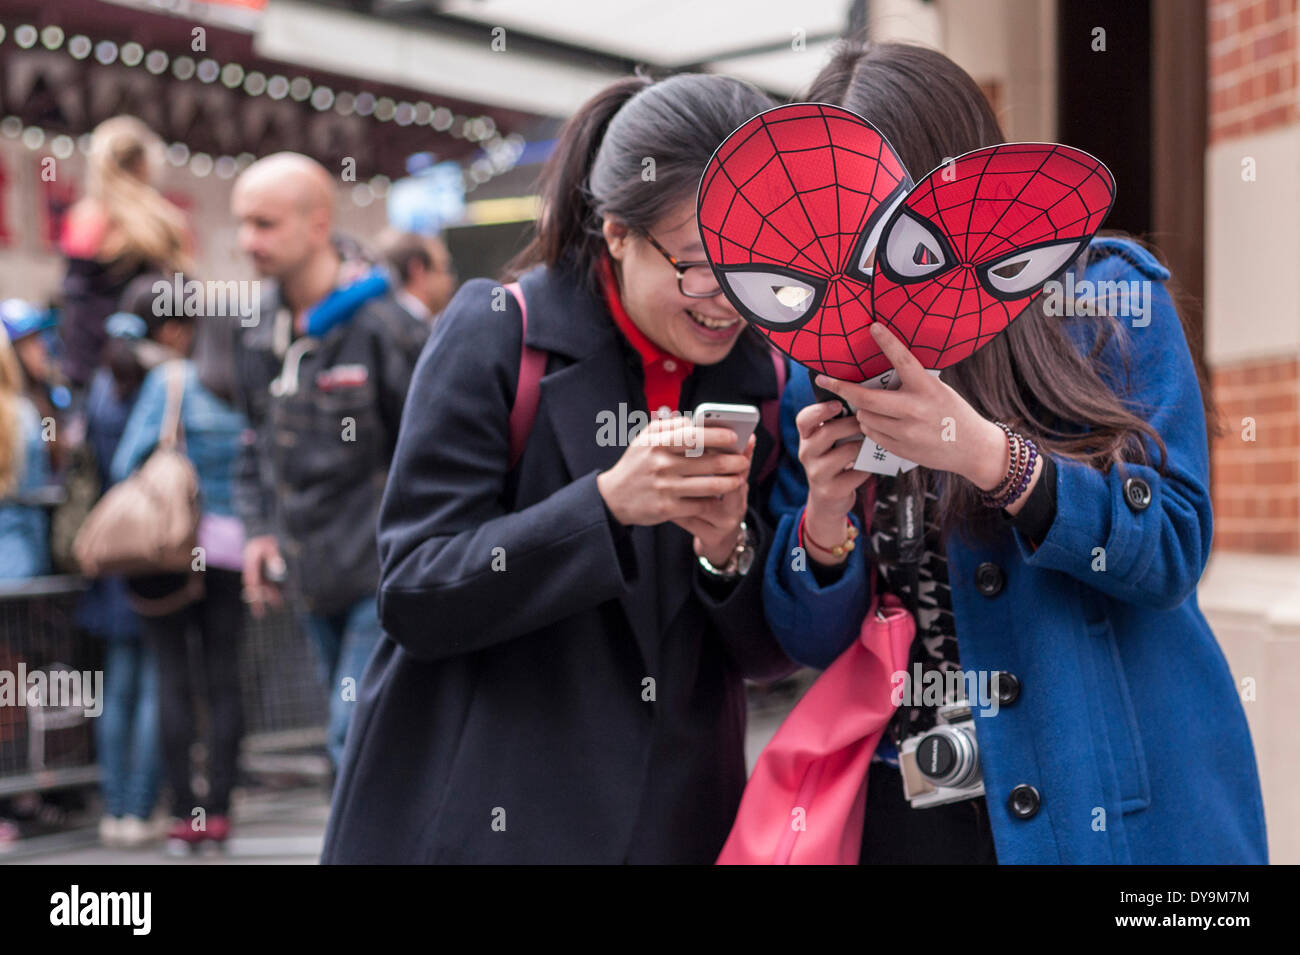 Leicester Square, London, UK, 10 April 2014.  Crowds gather to see the stars of  'The Amazing Spider-Man 2' movie which was having its world premiere.  These two girls were excited to snap a photo of their comic book superhero. Credit:  Stephen Chung/Alamy Live News Stock Photo